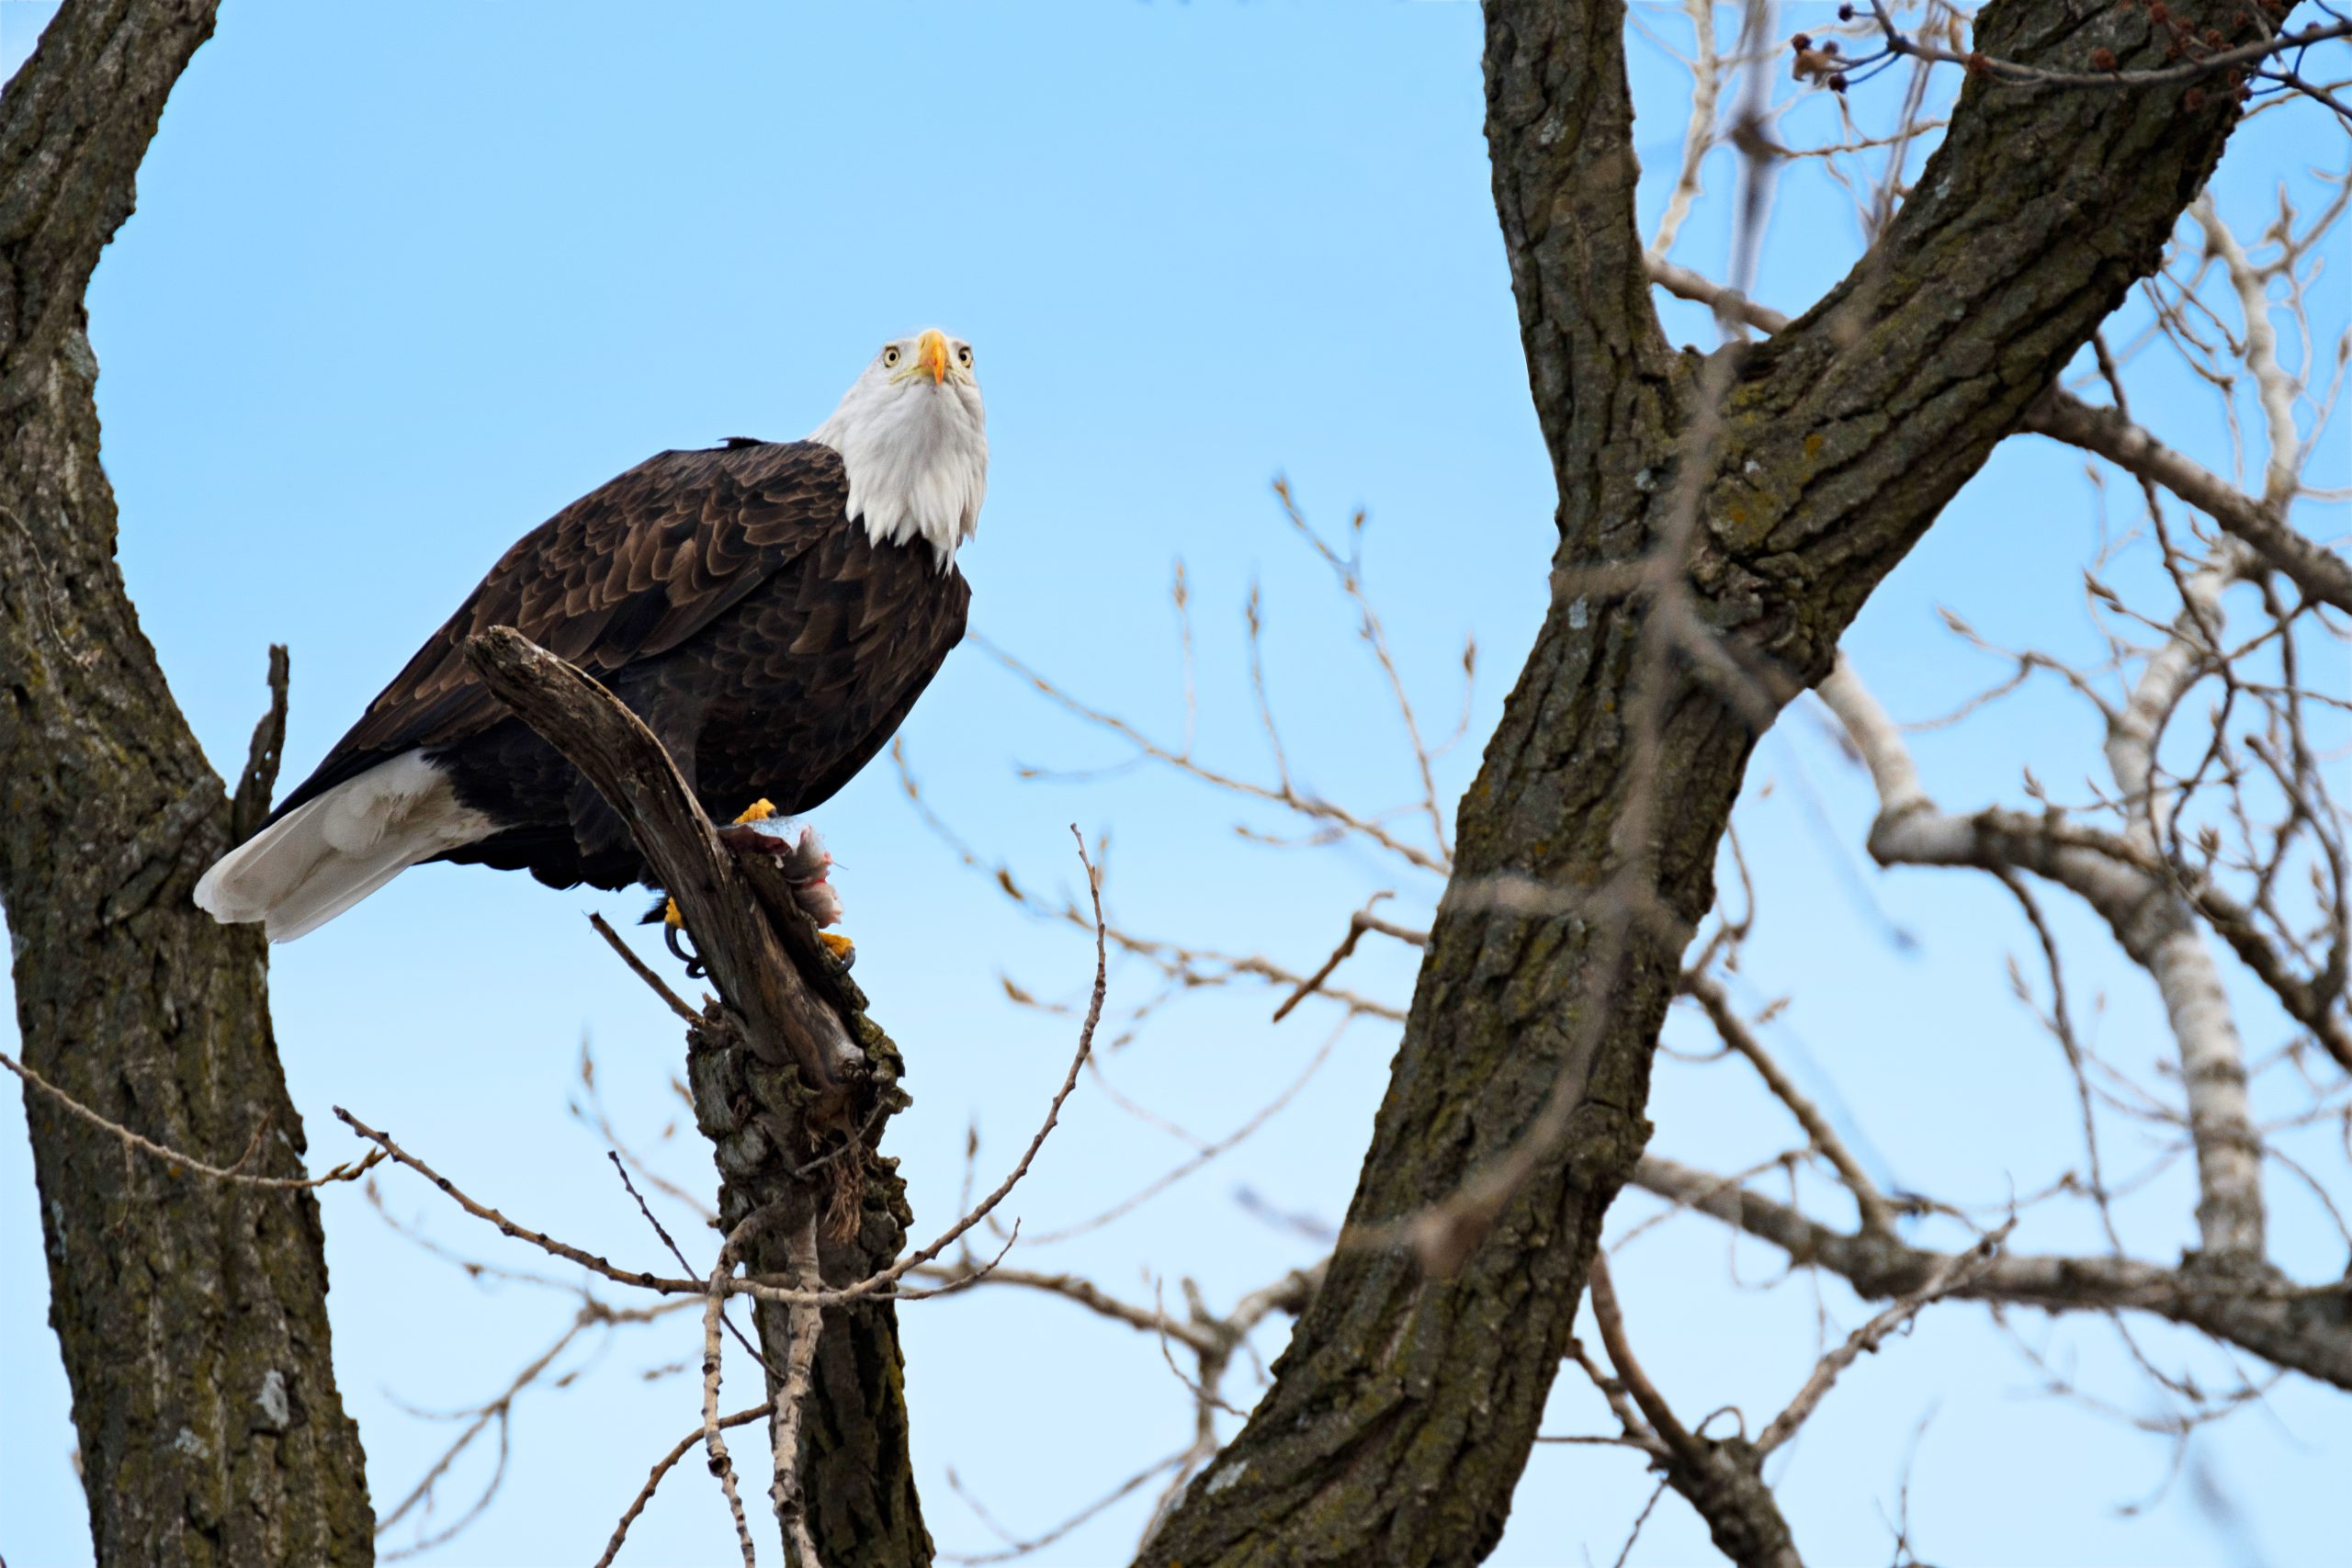 bald eagle in tree missisippi river illinois